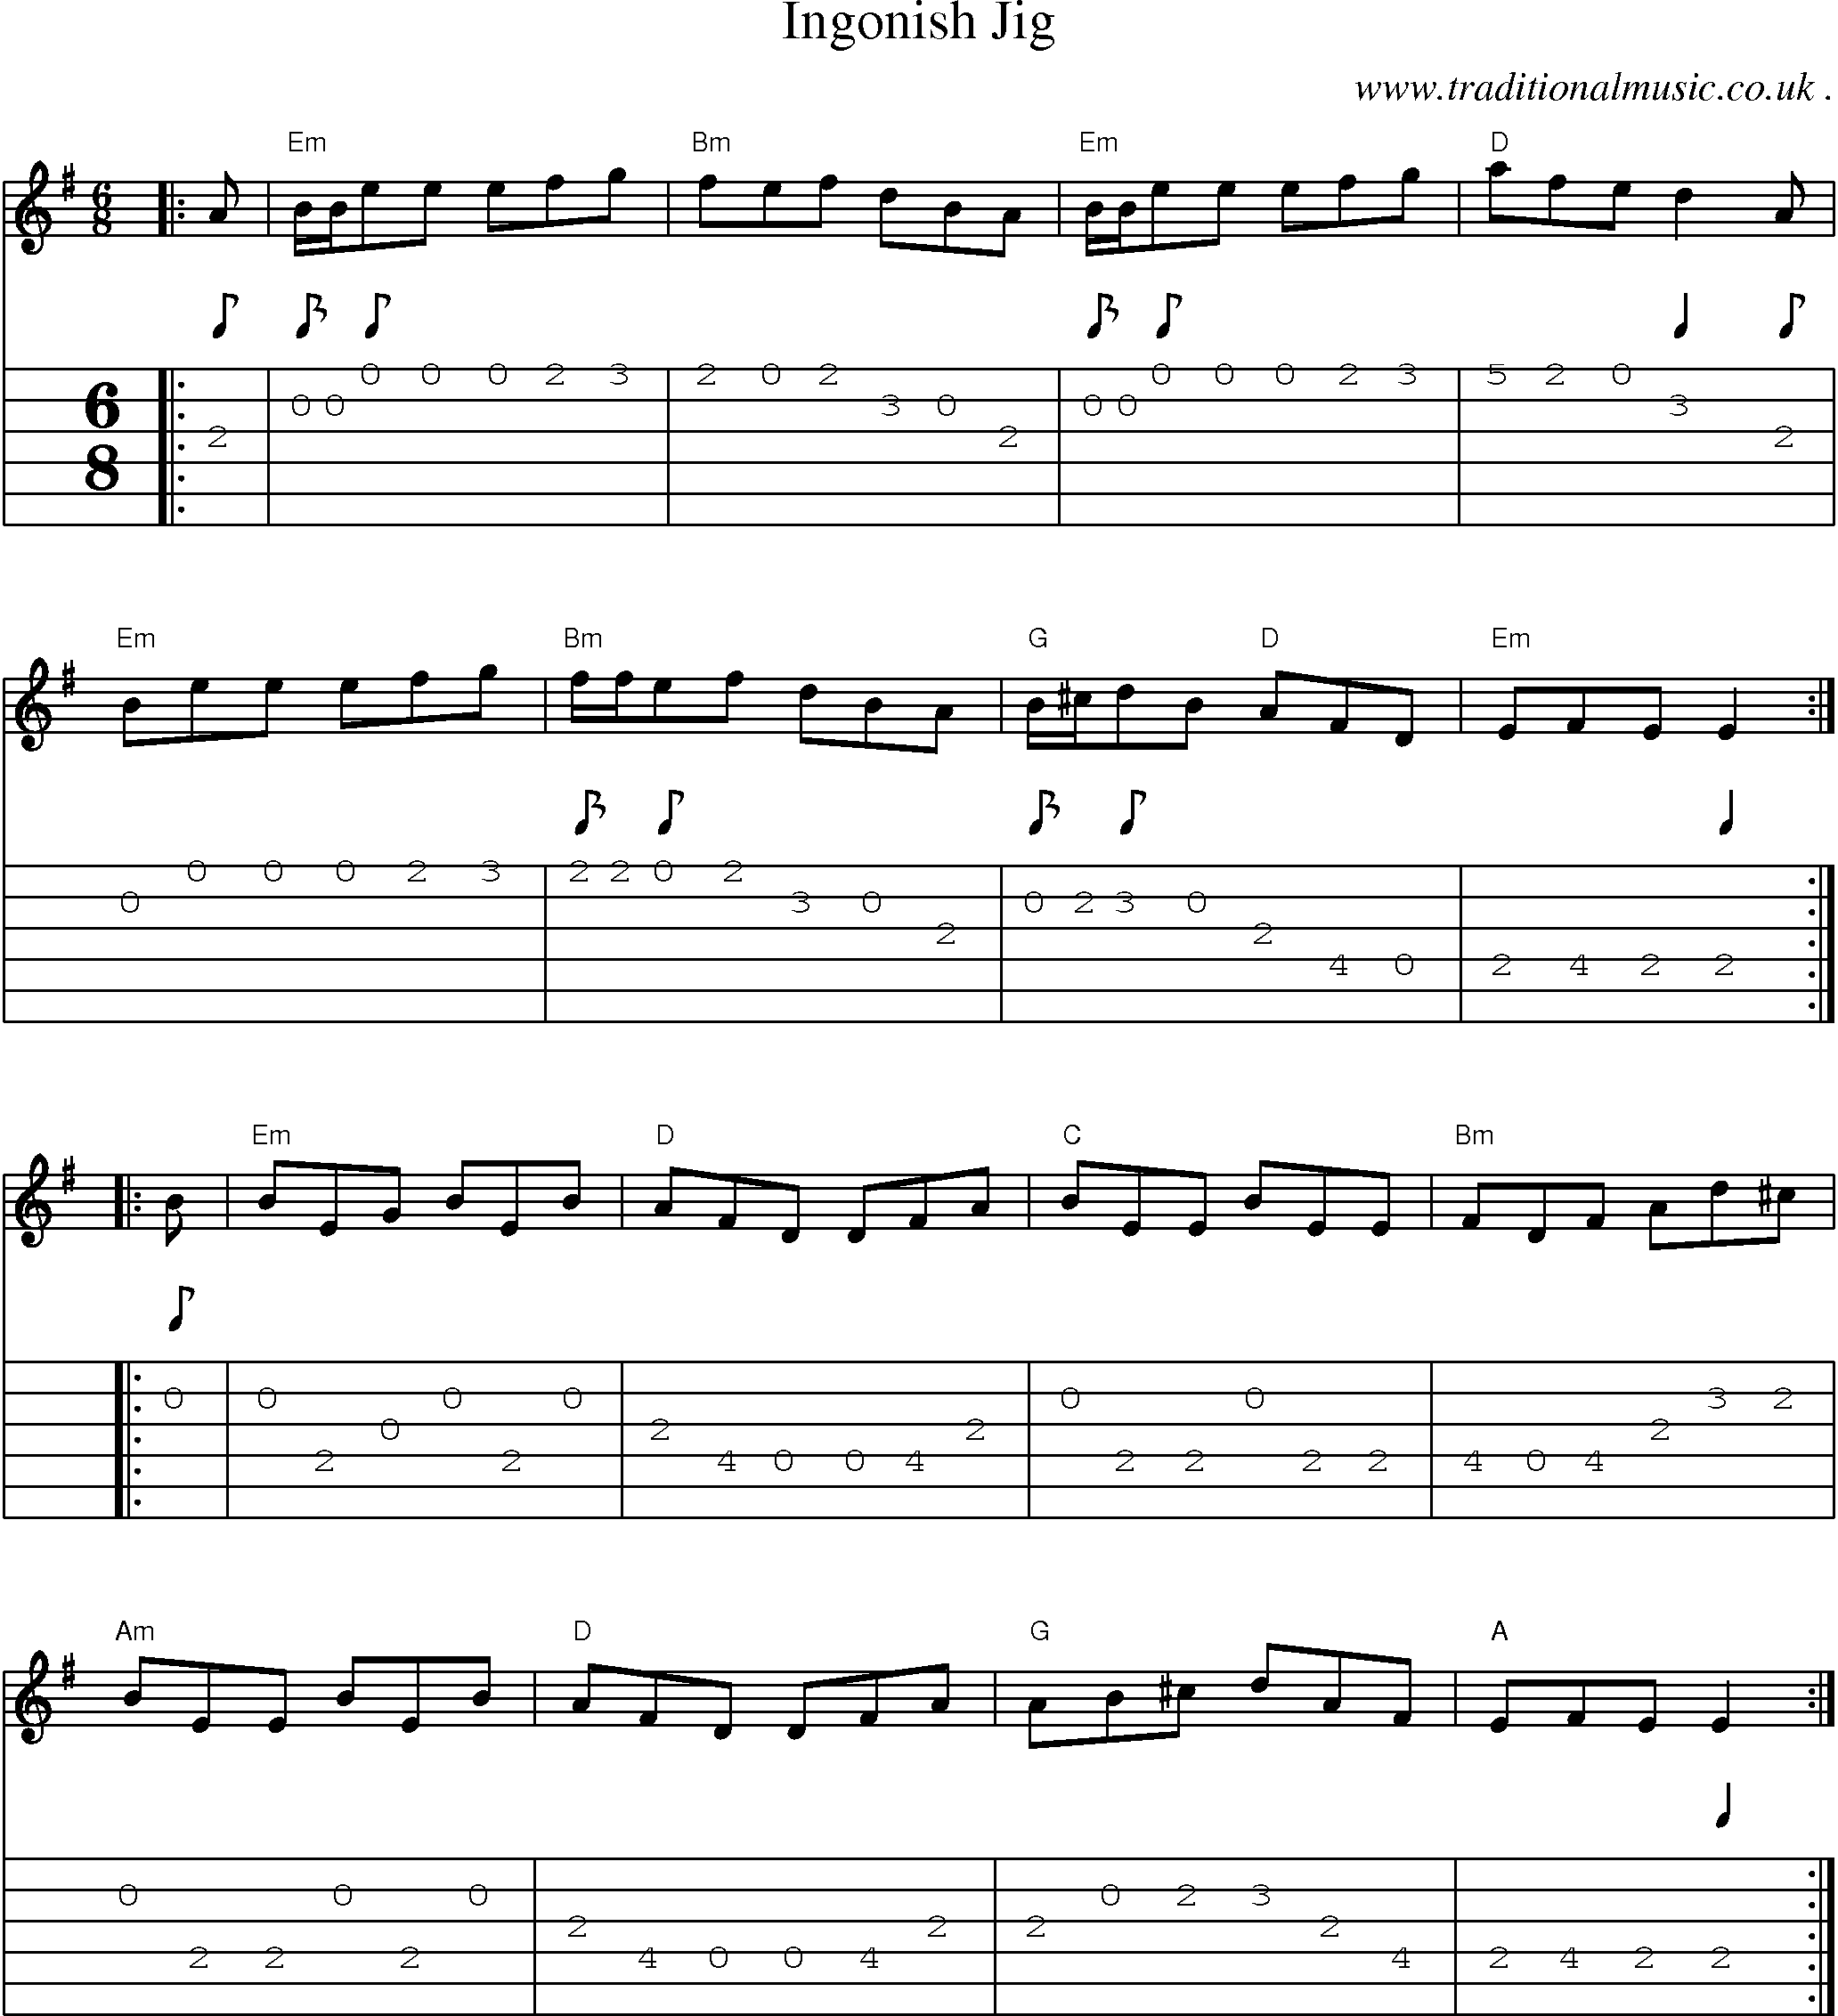 Music Score and Guitar Tabs for Ingonish Jig